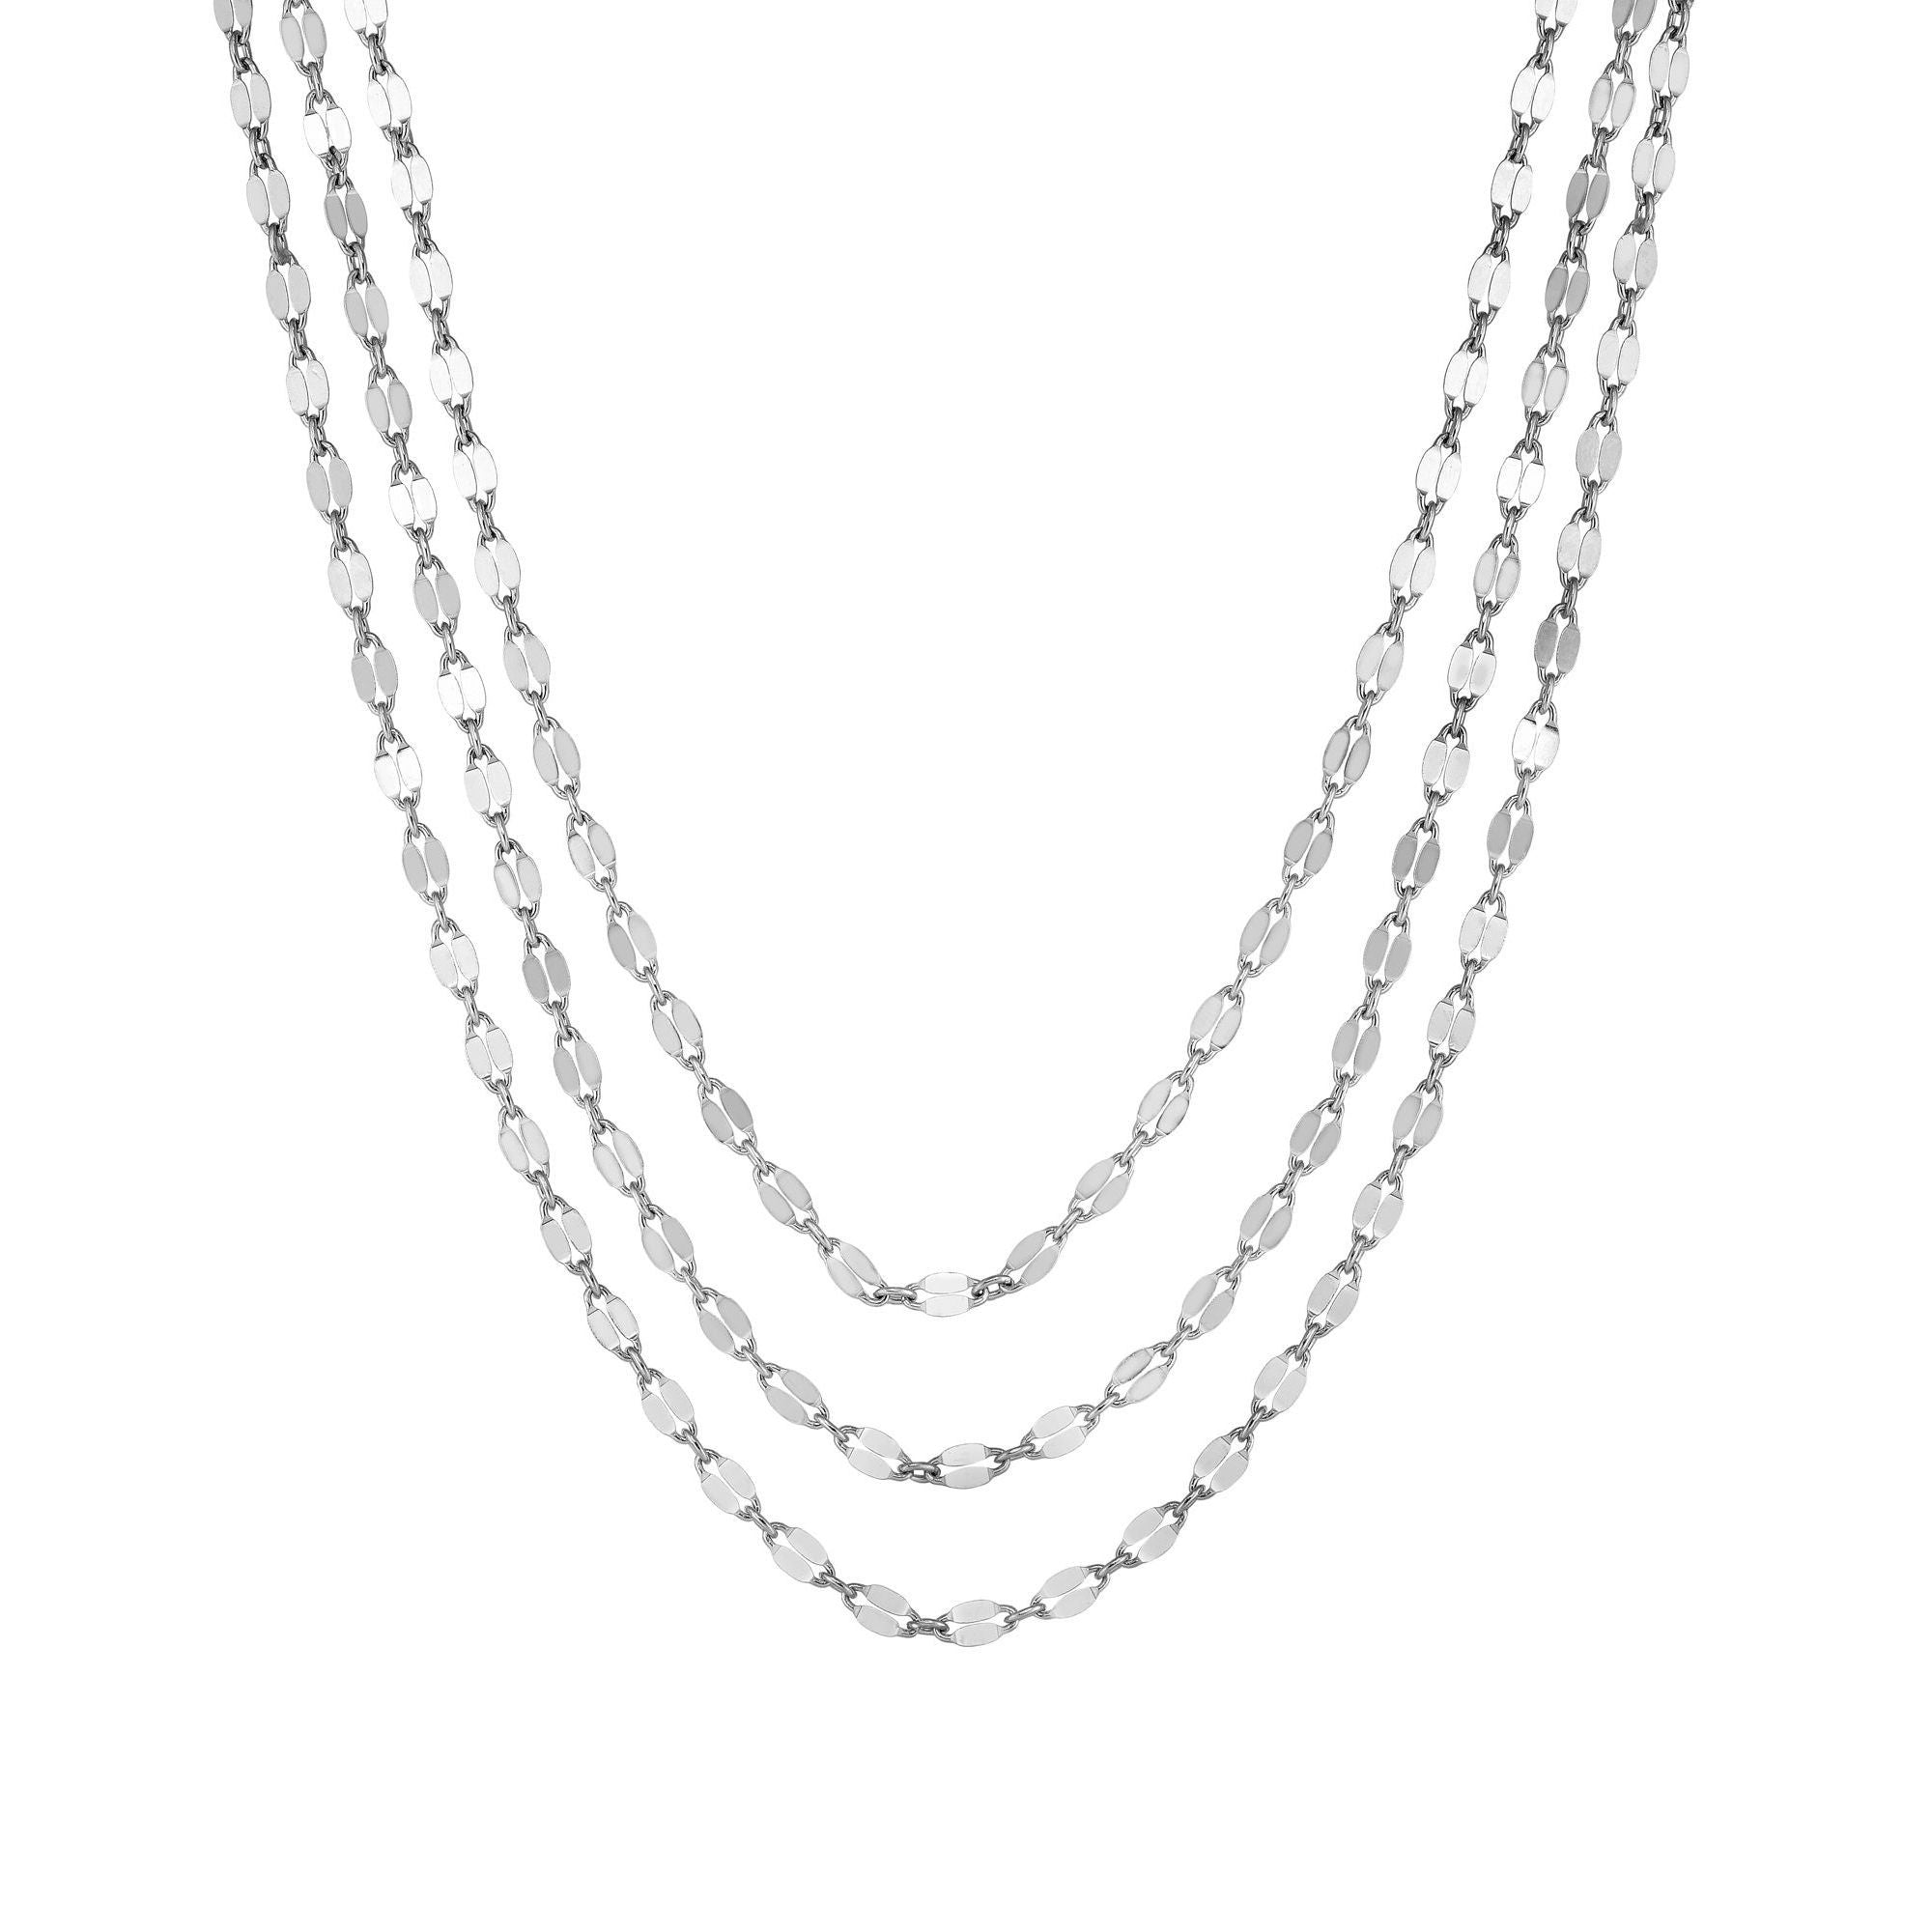 Sterling Silver Triple Chain Choker Necklace, 16"